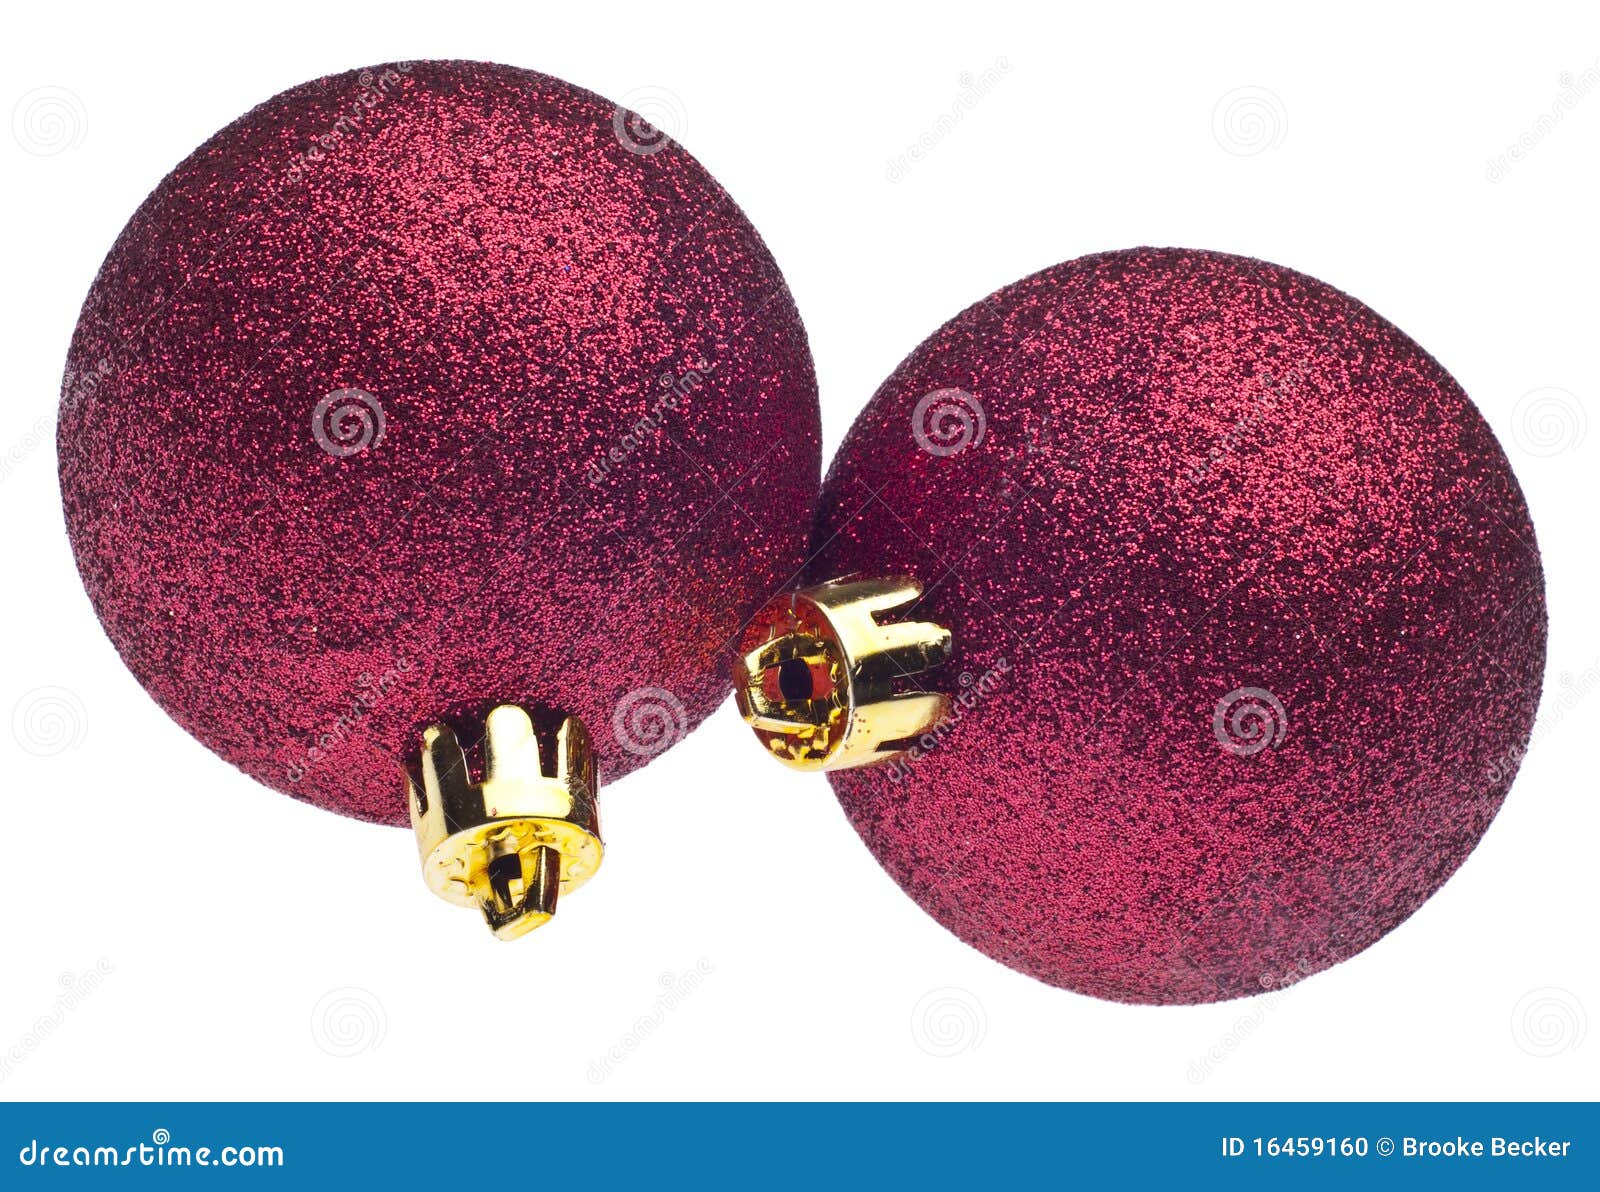 Festive Holiday Ornament stock photo. Image of traditional - 16459160